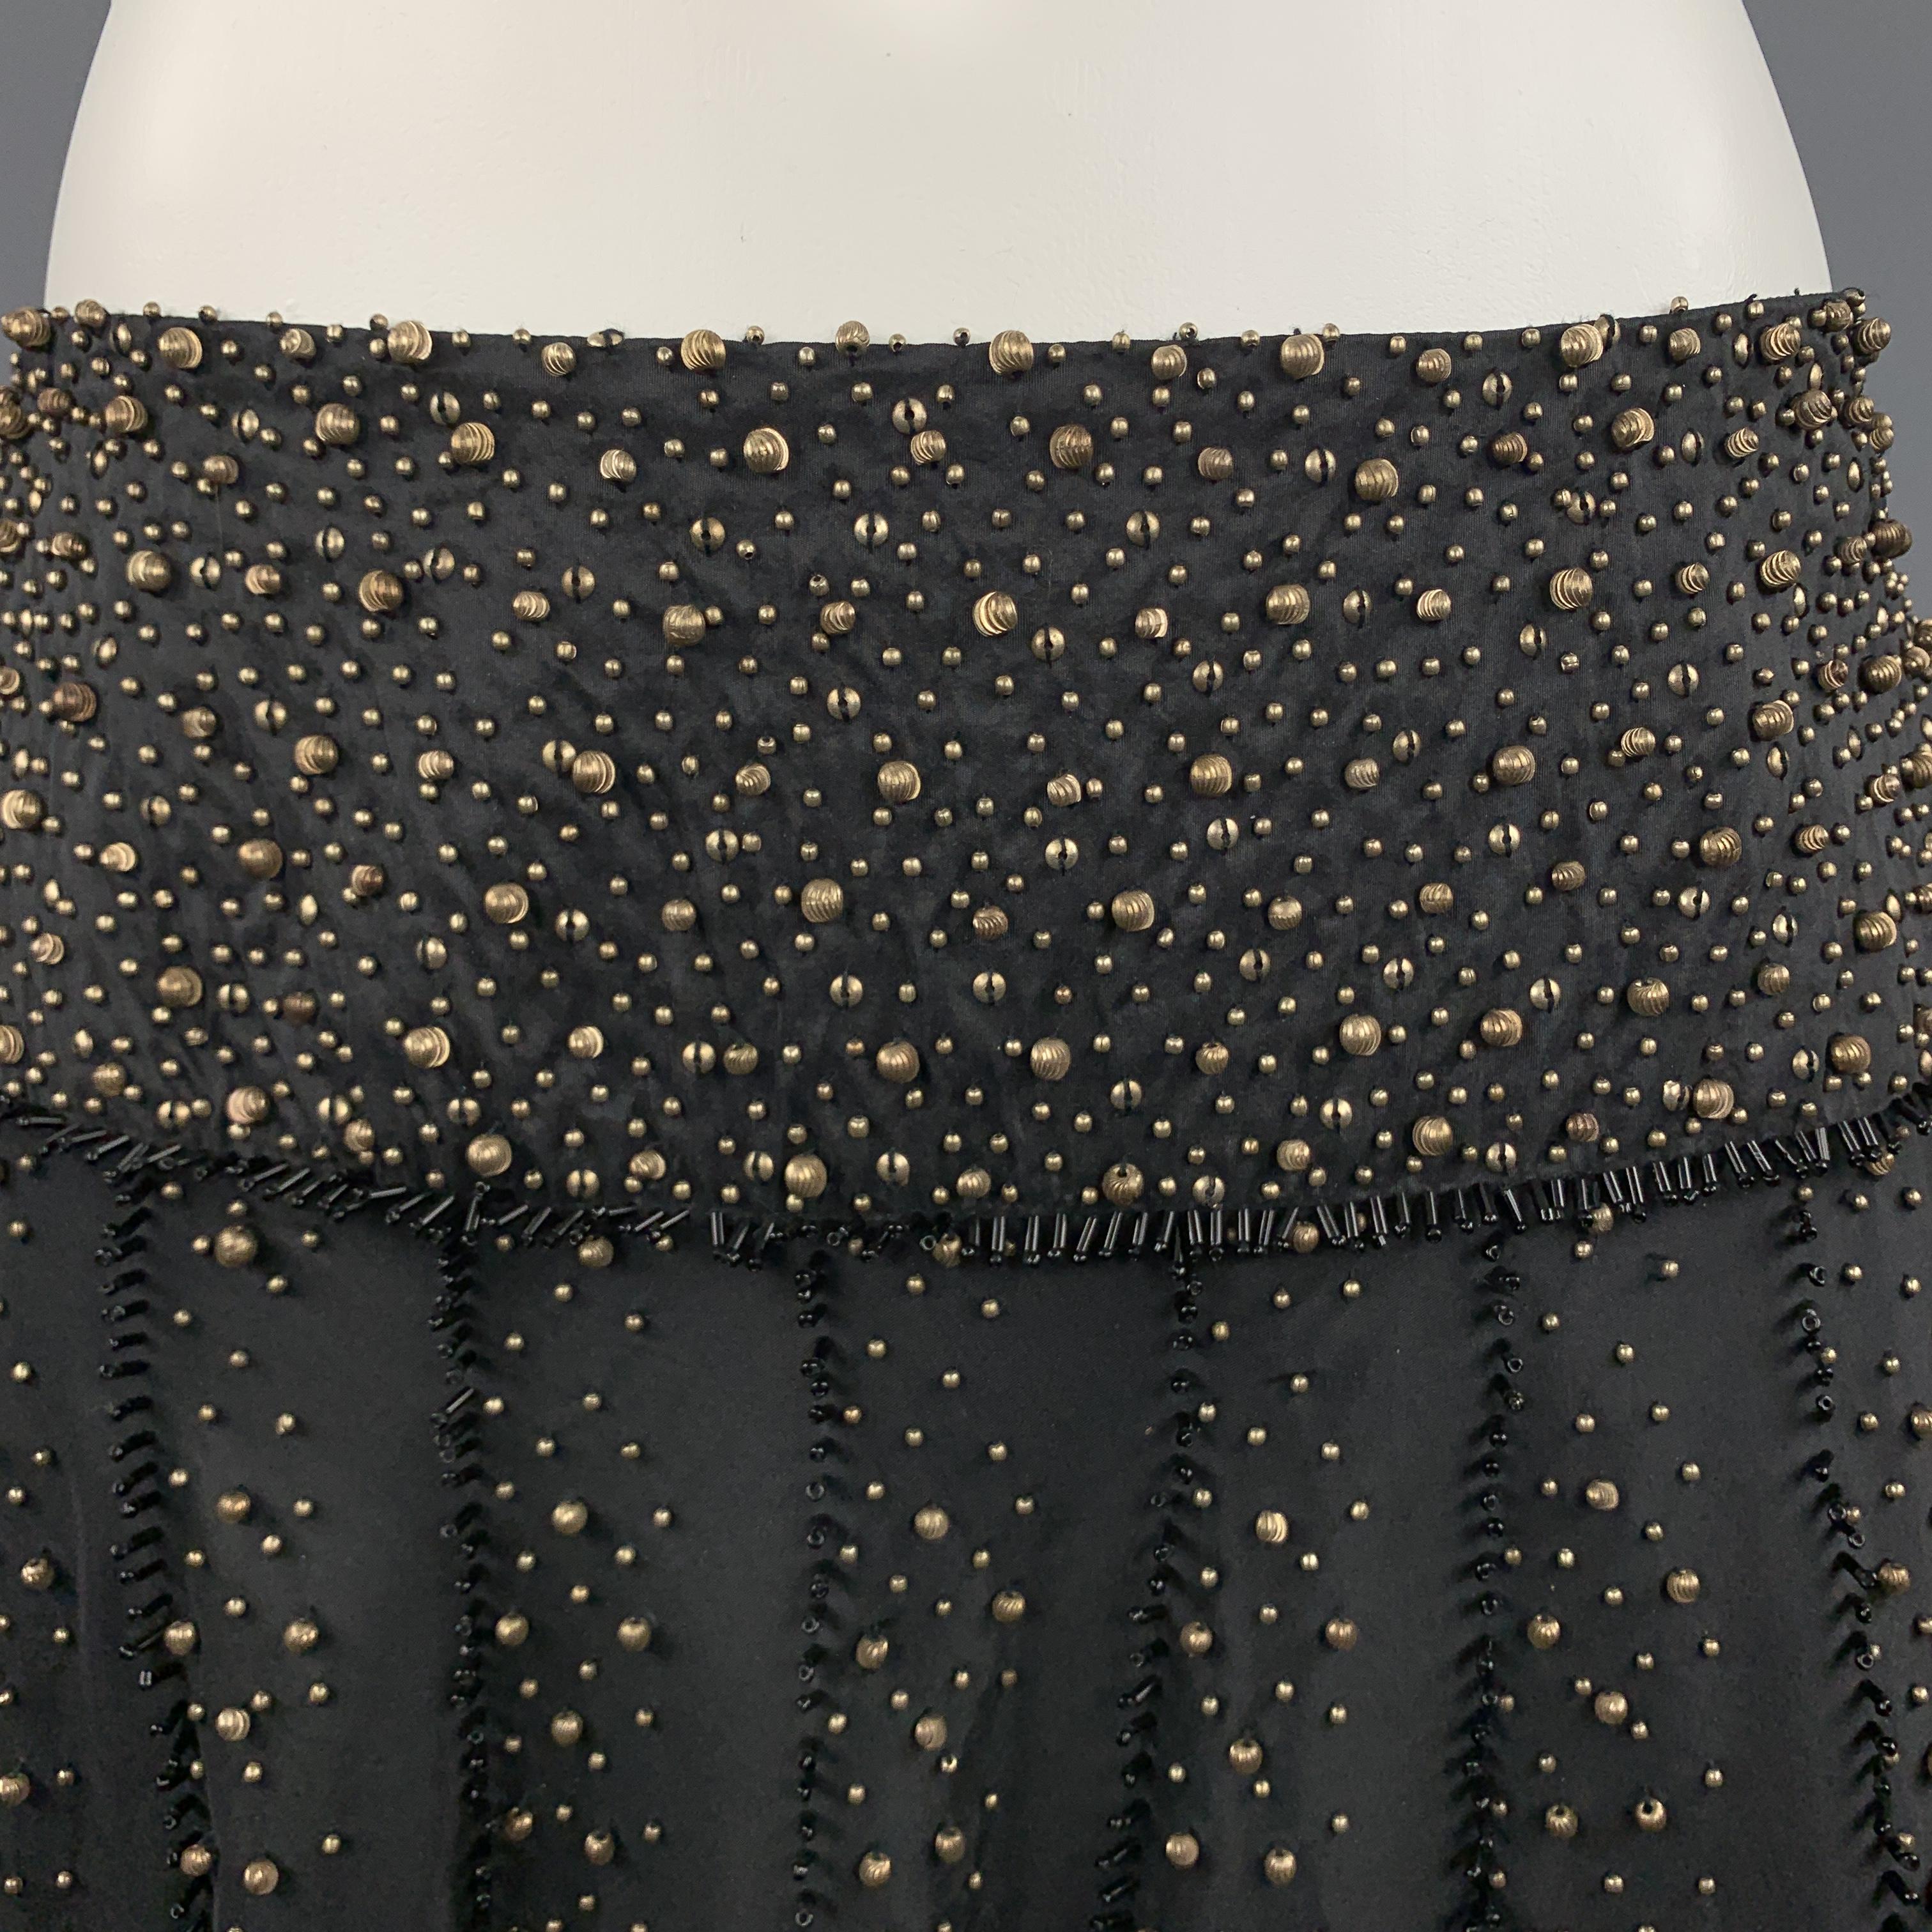 NAEEM KHAN A line skirt comes in black silk taffeta gold tone beadwork throughout and black bugle bead piping. Made in USA.

Excellent Pre-Owned Condition.
Marked: US 6

Measurements:

Waist: 29 in.
Hip: 60 in.
Length: 25 in.